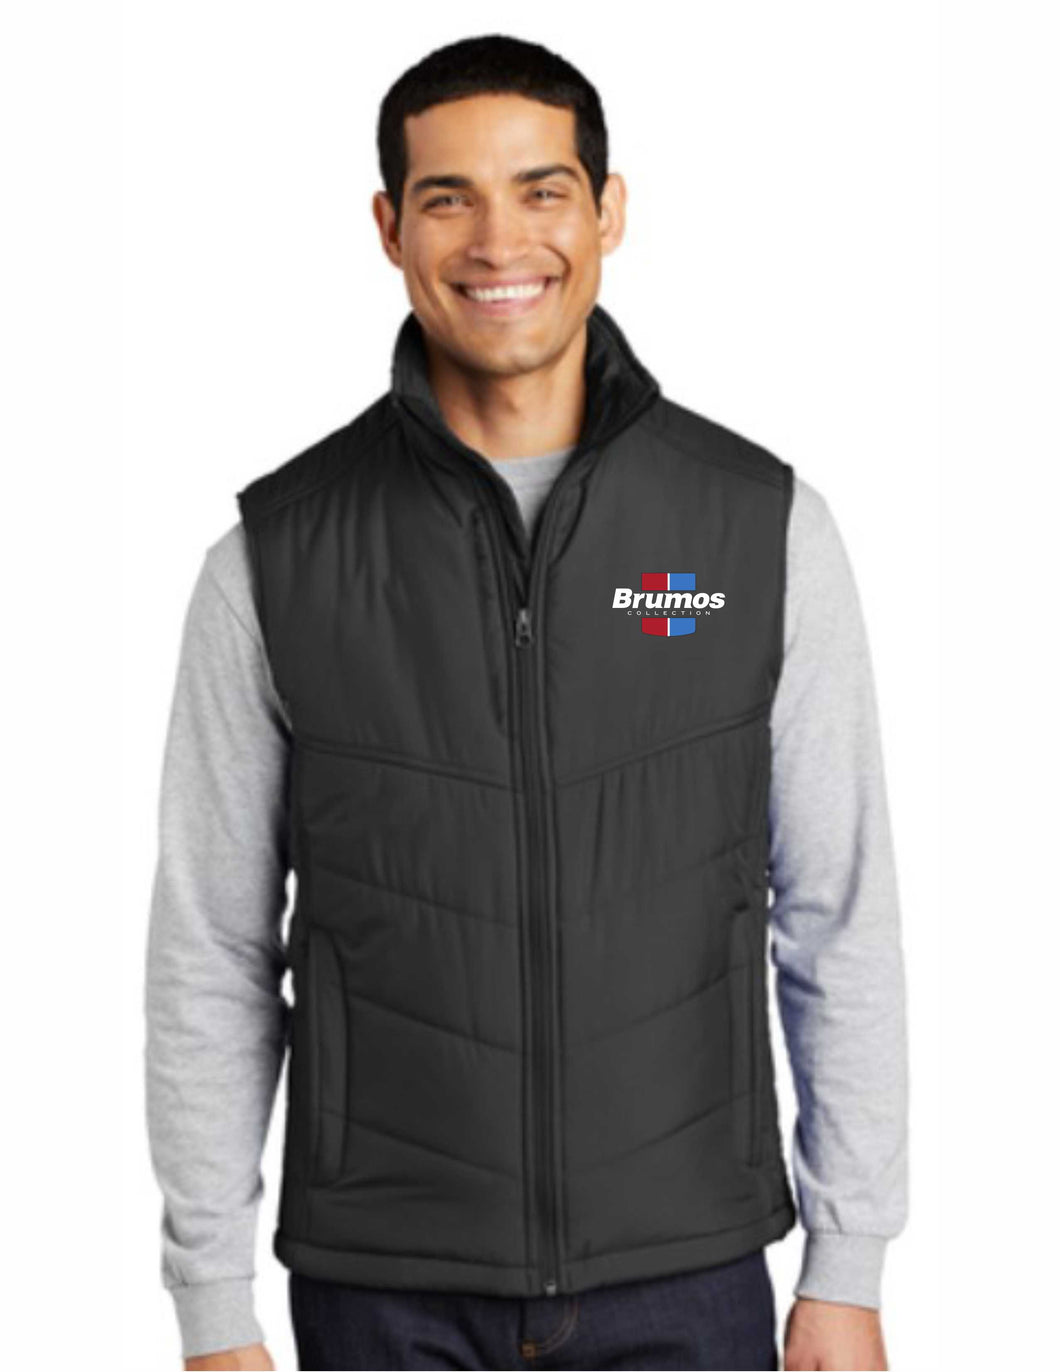 Brumos Collection Men's Puffy Vest DISCOUNTED!!